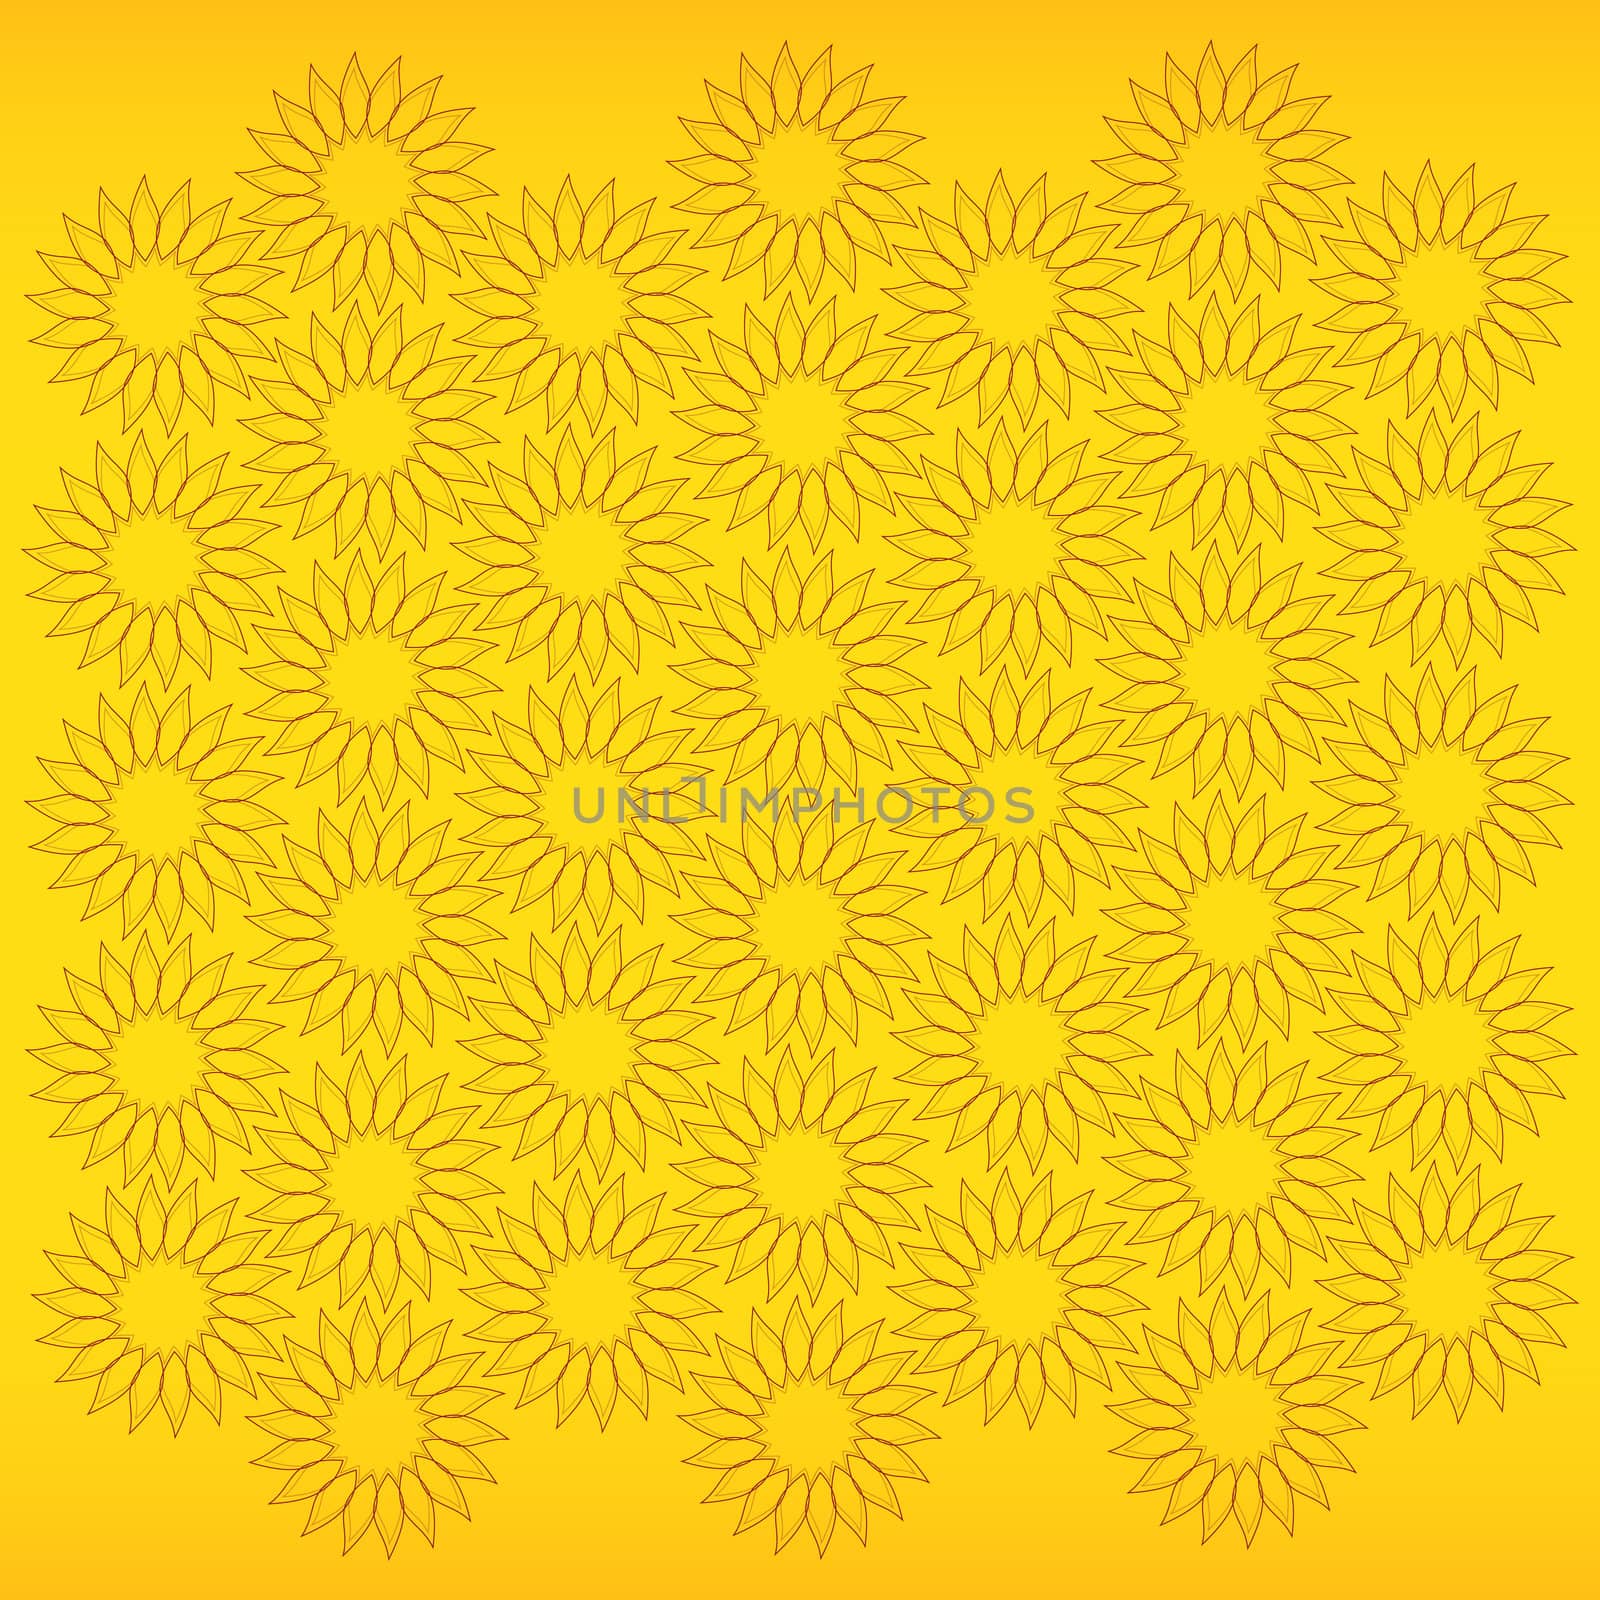 fine abstract background with sunflowers on yellow